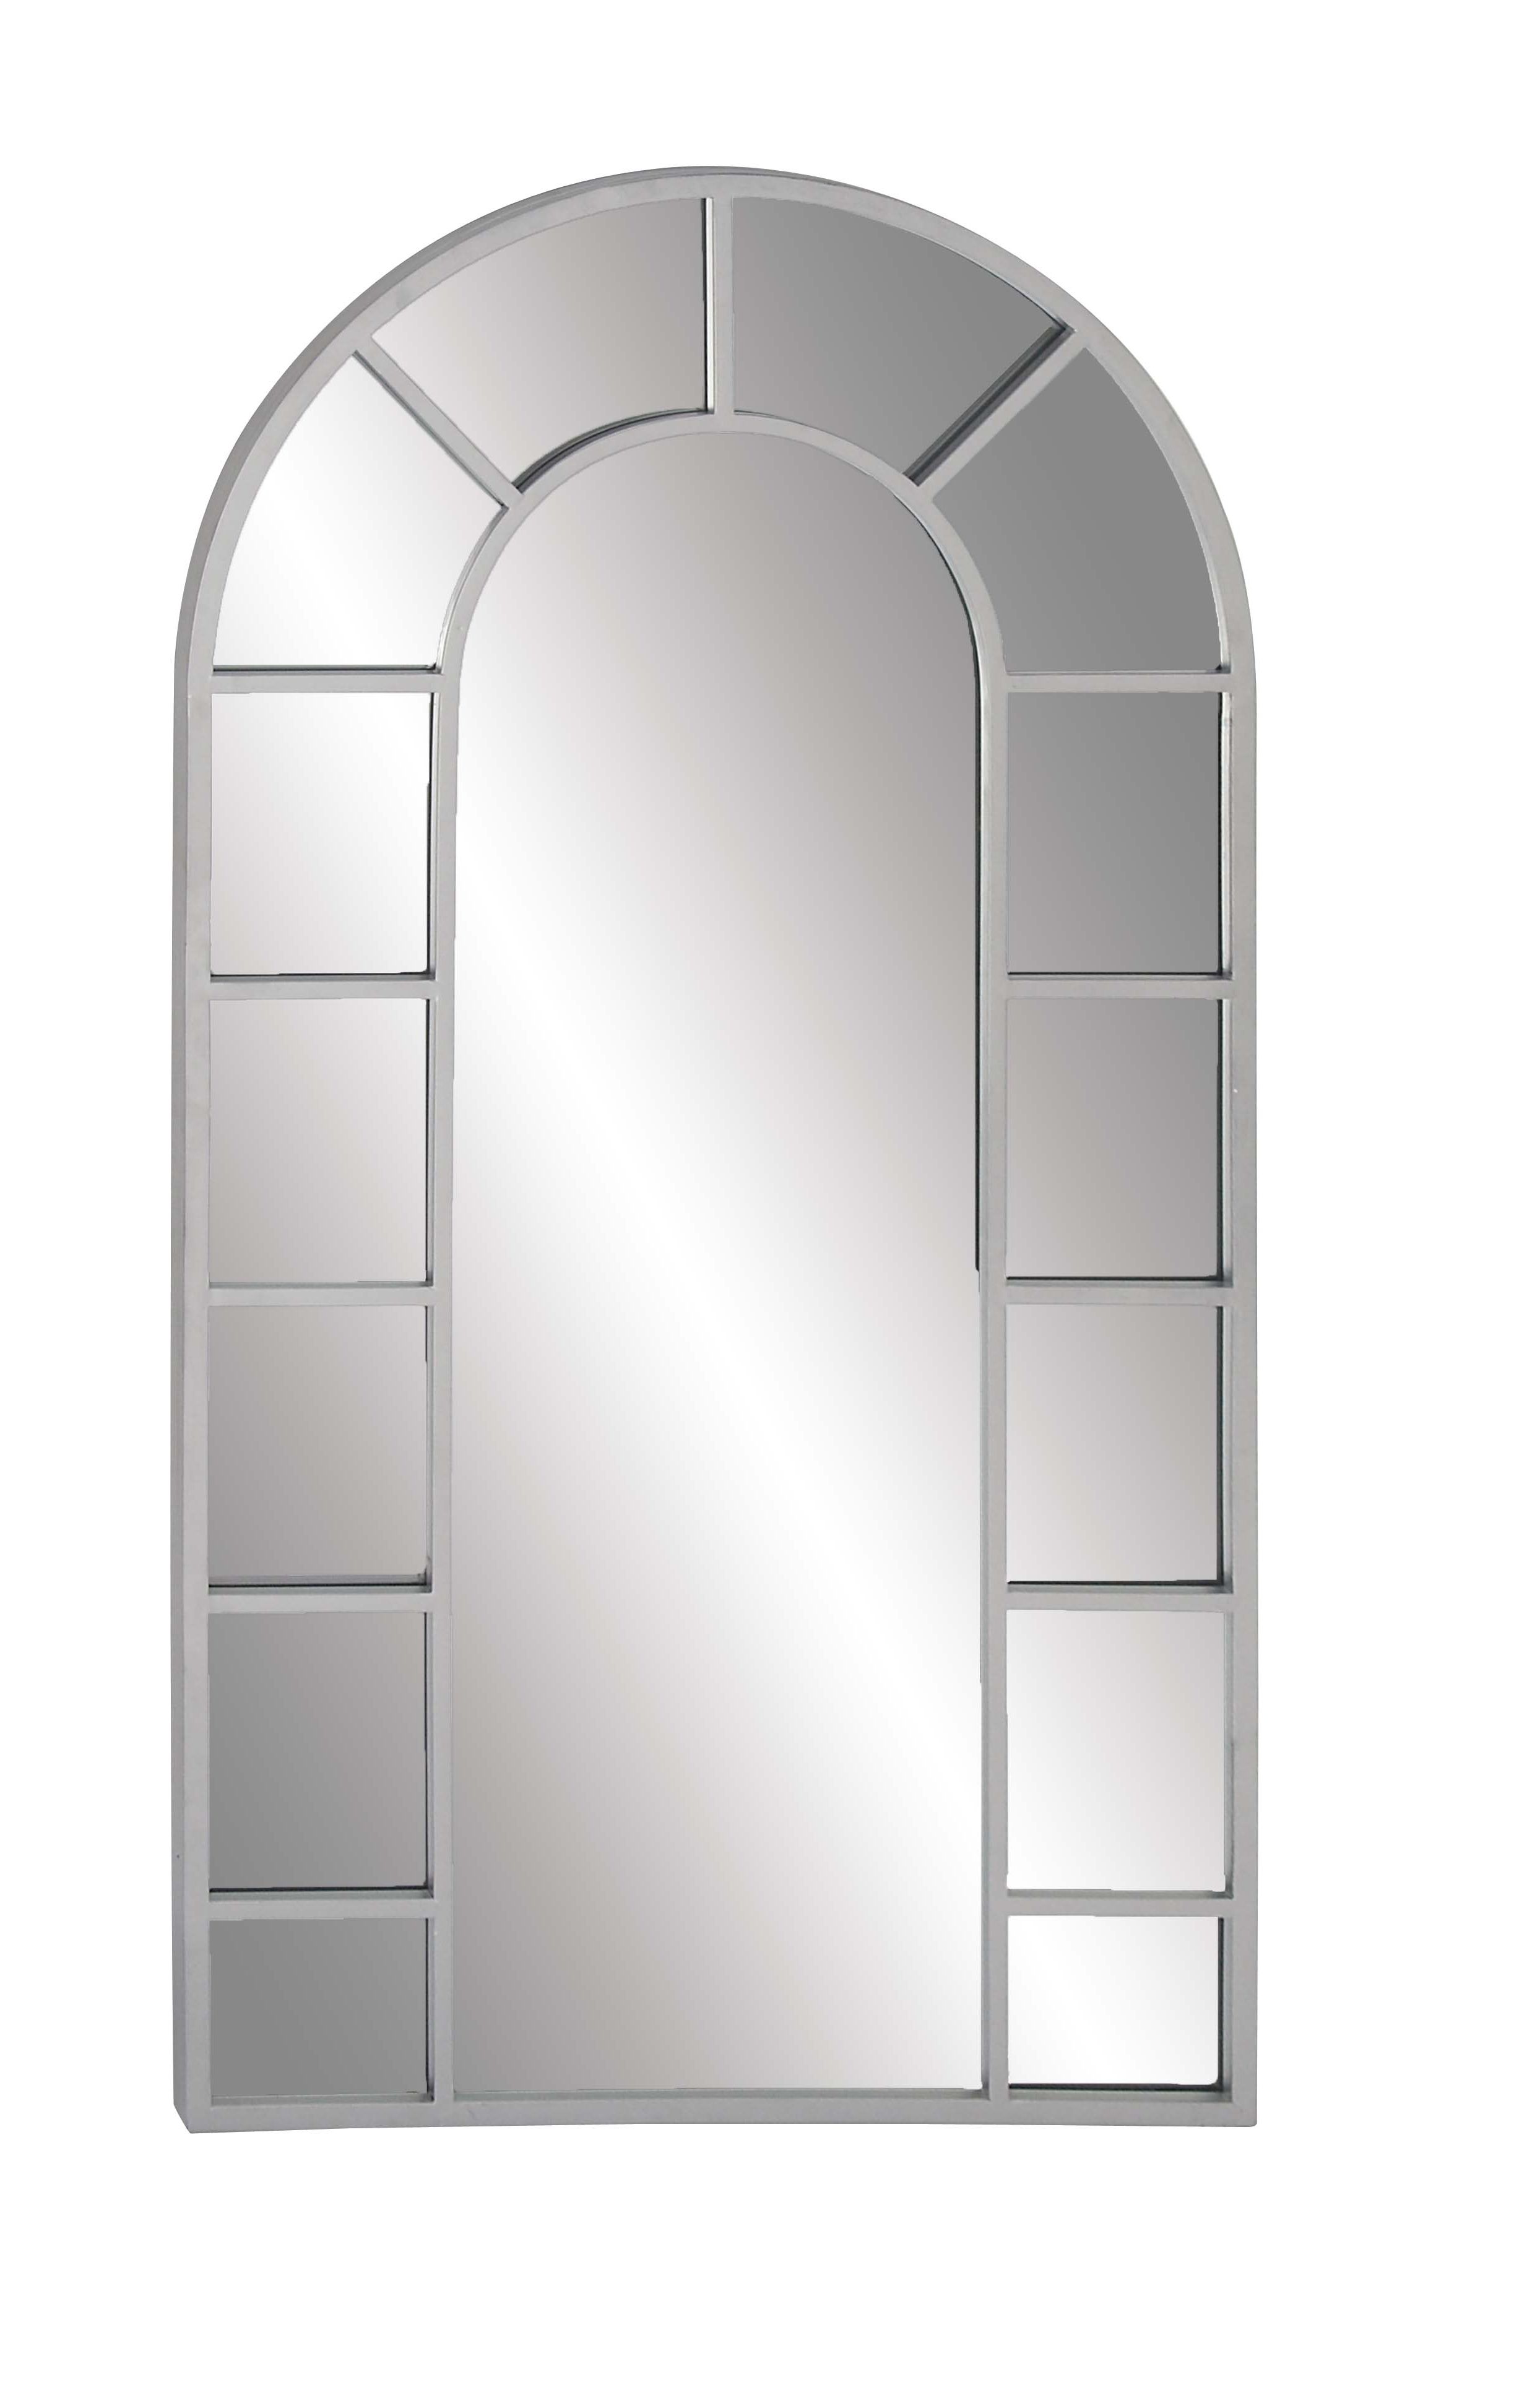 Arch Vertical Wall Mirrors Pertaining To Popular Decmode Contemporary Wood And Metal Arched White Wall Mirror, White (View 6 of 20)